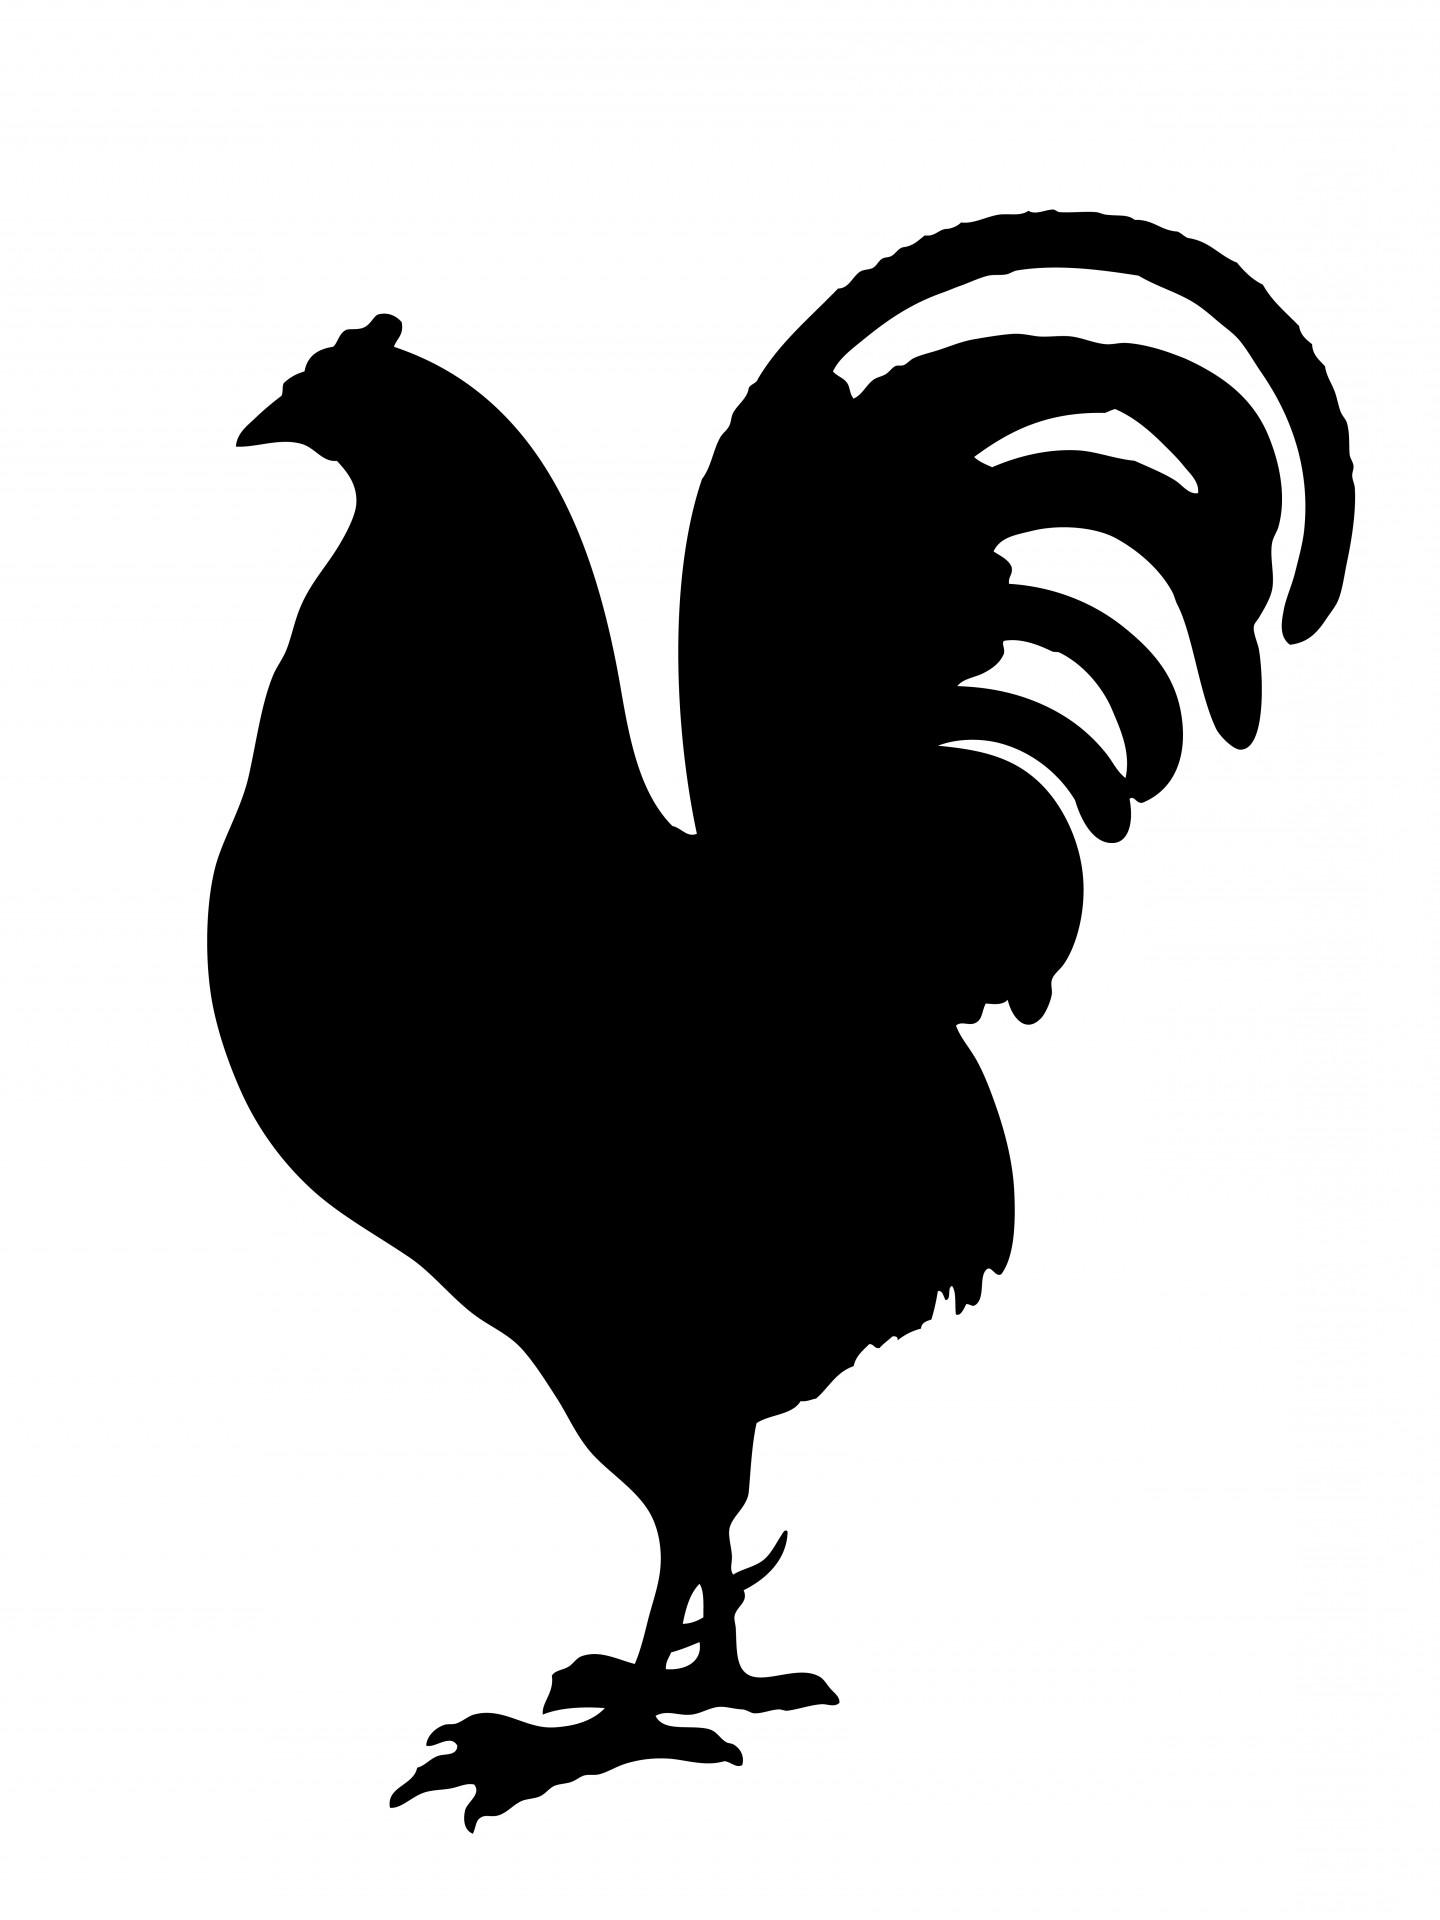 Download Rooster Silhouette Free at GetDrawings.com | Free for ...